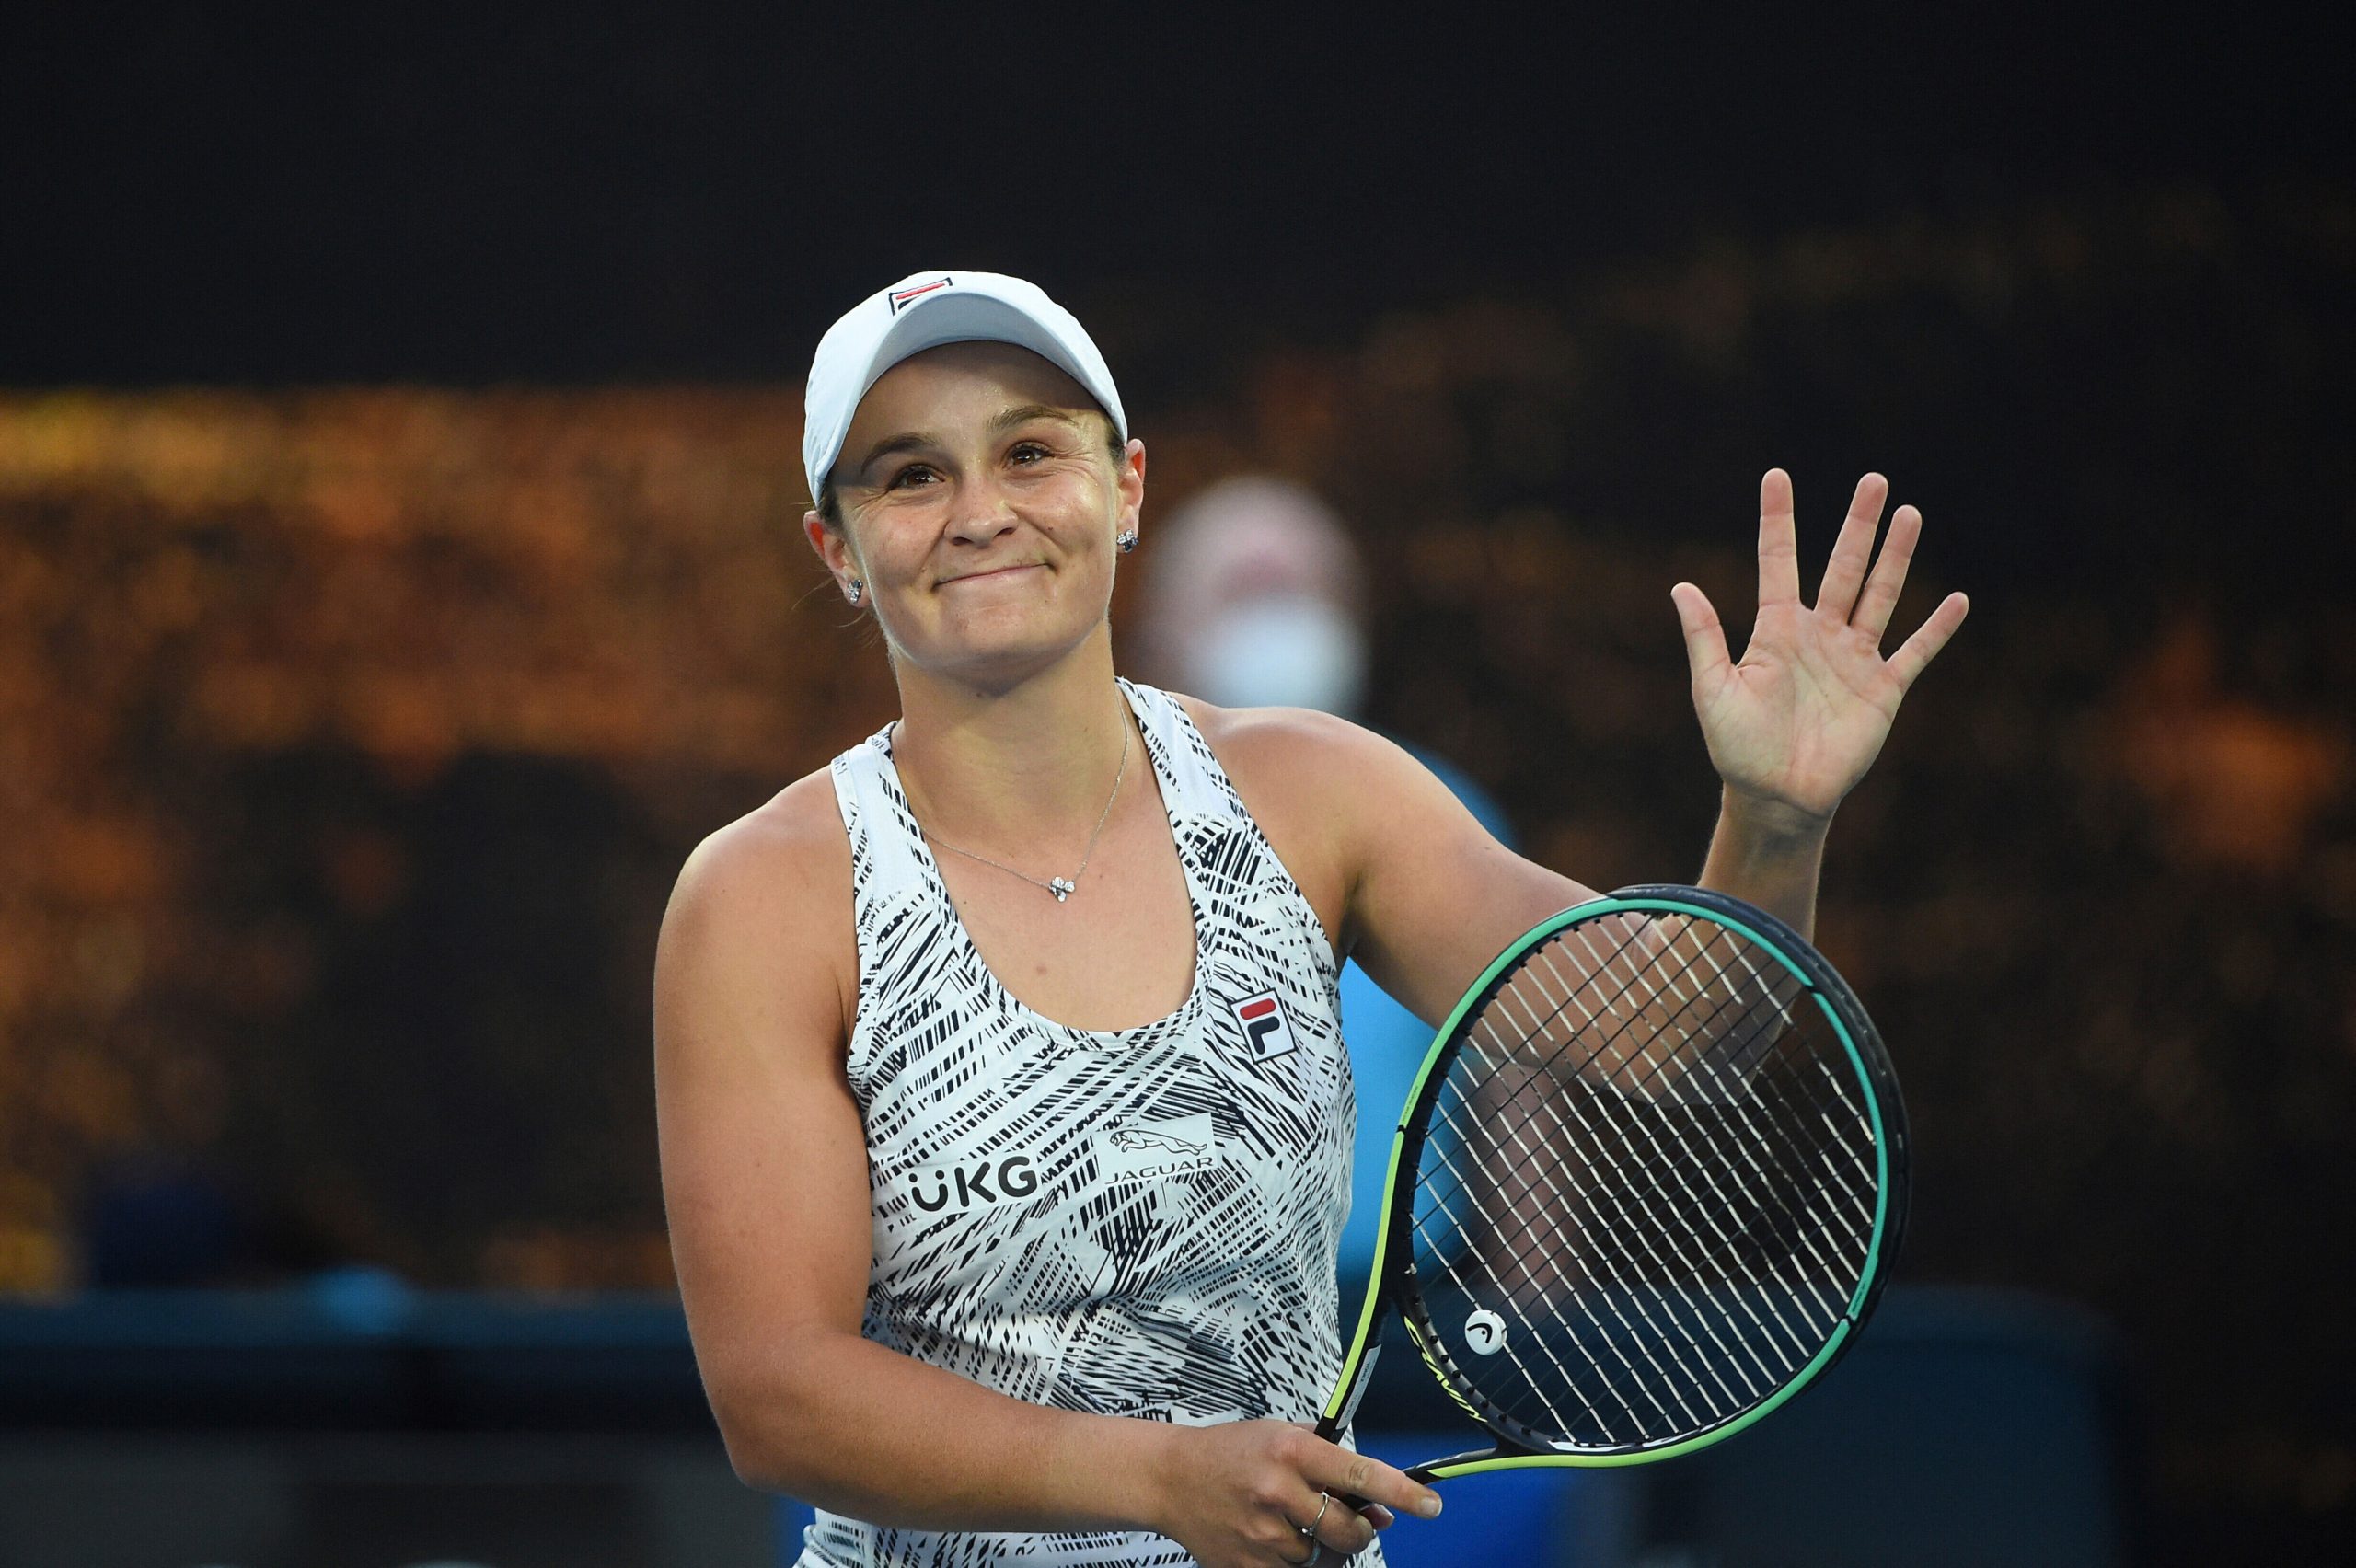 Ashleigh Barty retirement: Why did she quit tennis?